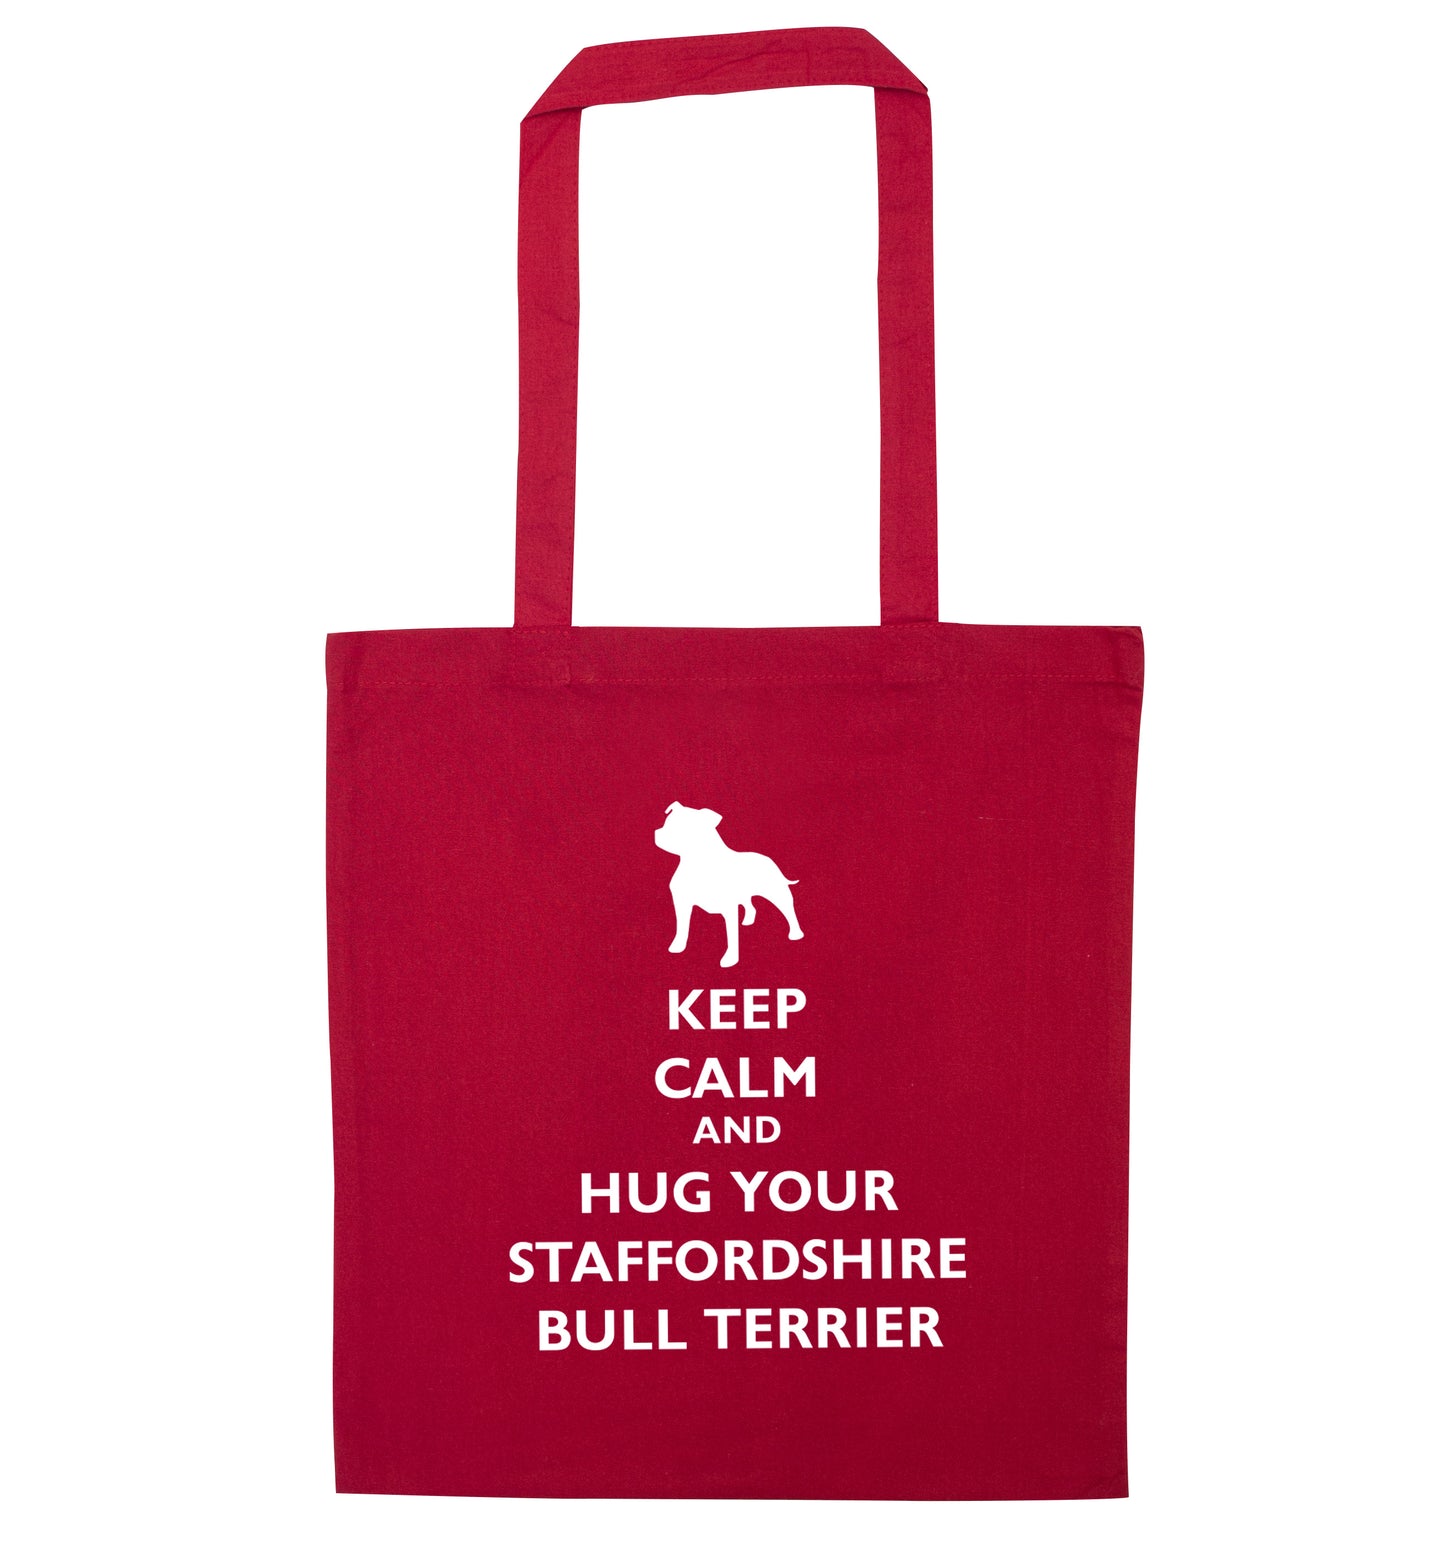 Keep calm and hug your bull terrier  red tote bag